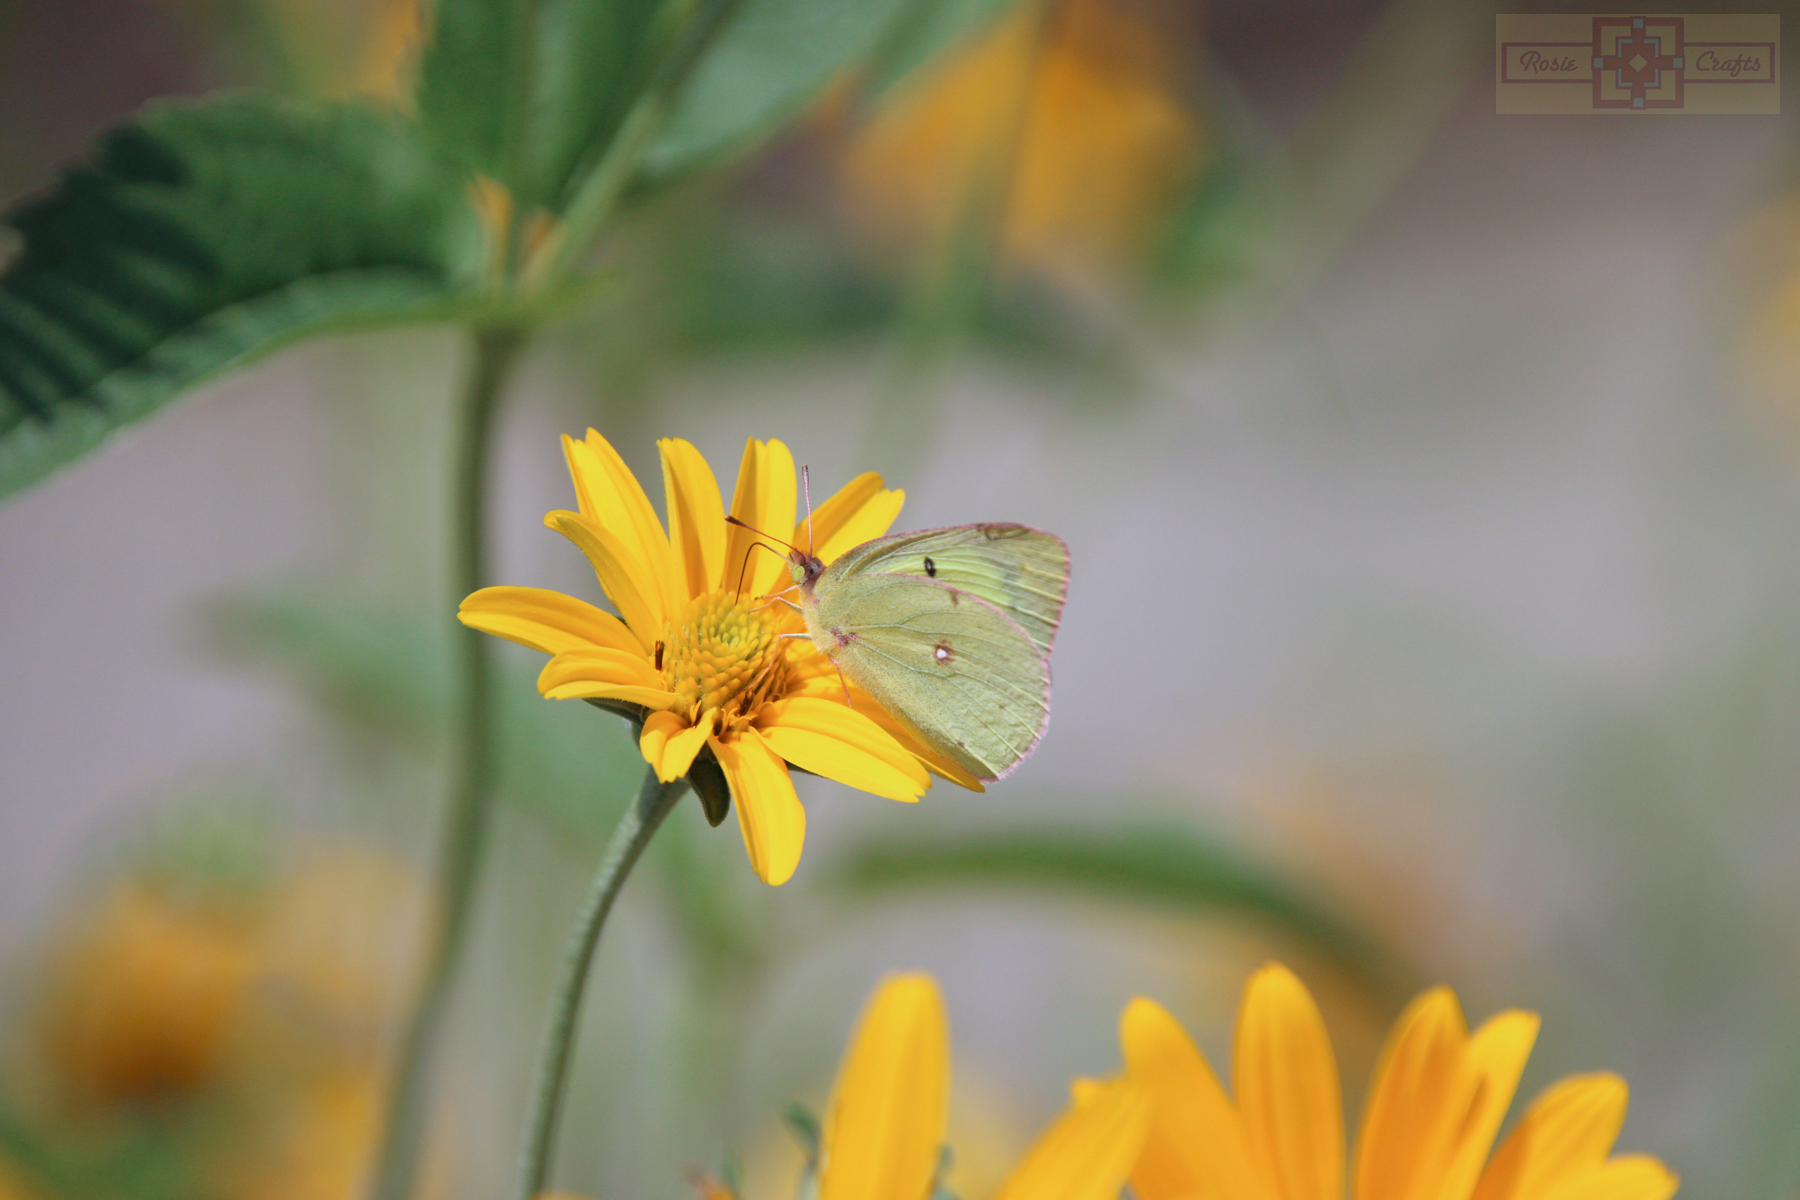 Rosie Crafts Yellow Cabbage White Butterfly Photography